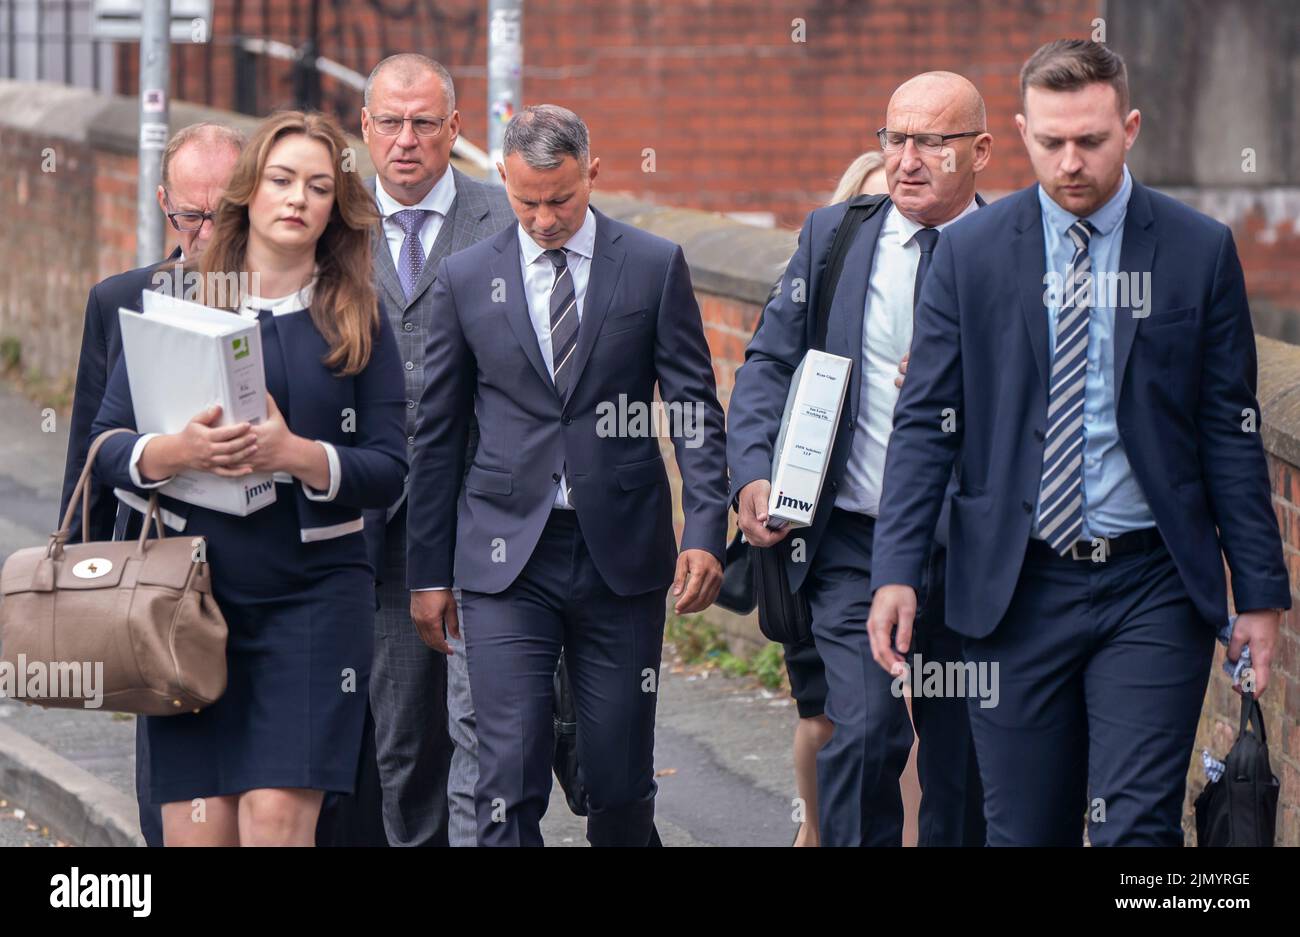 Former Manchester United footballer Ryan Giggs arrives at Manchester Minshull Street Crown Court where he is accused of controlling and coercive behaviour against ex-girlfriend Kate Greville between August 2017 and November 2020. Picture date: Monday August 8, 2022. Stock Photo